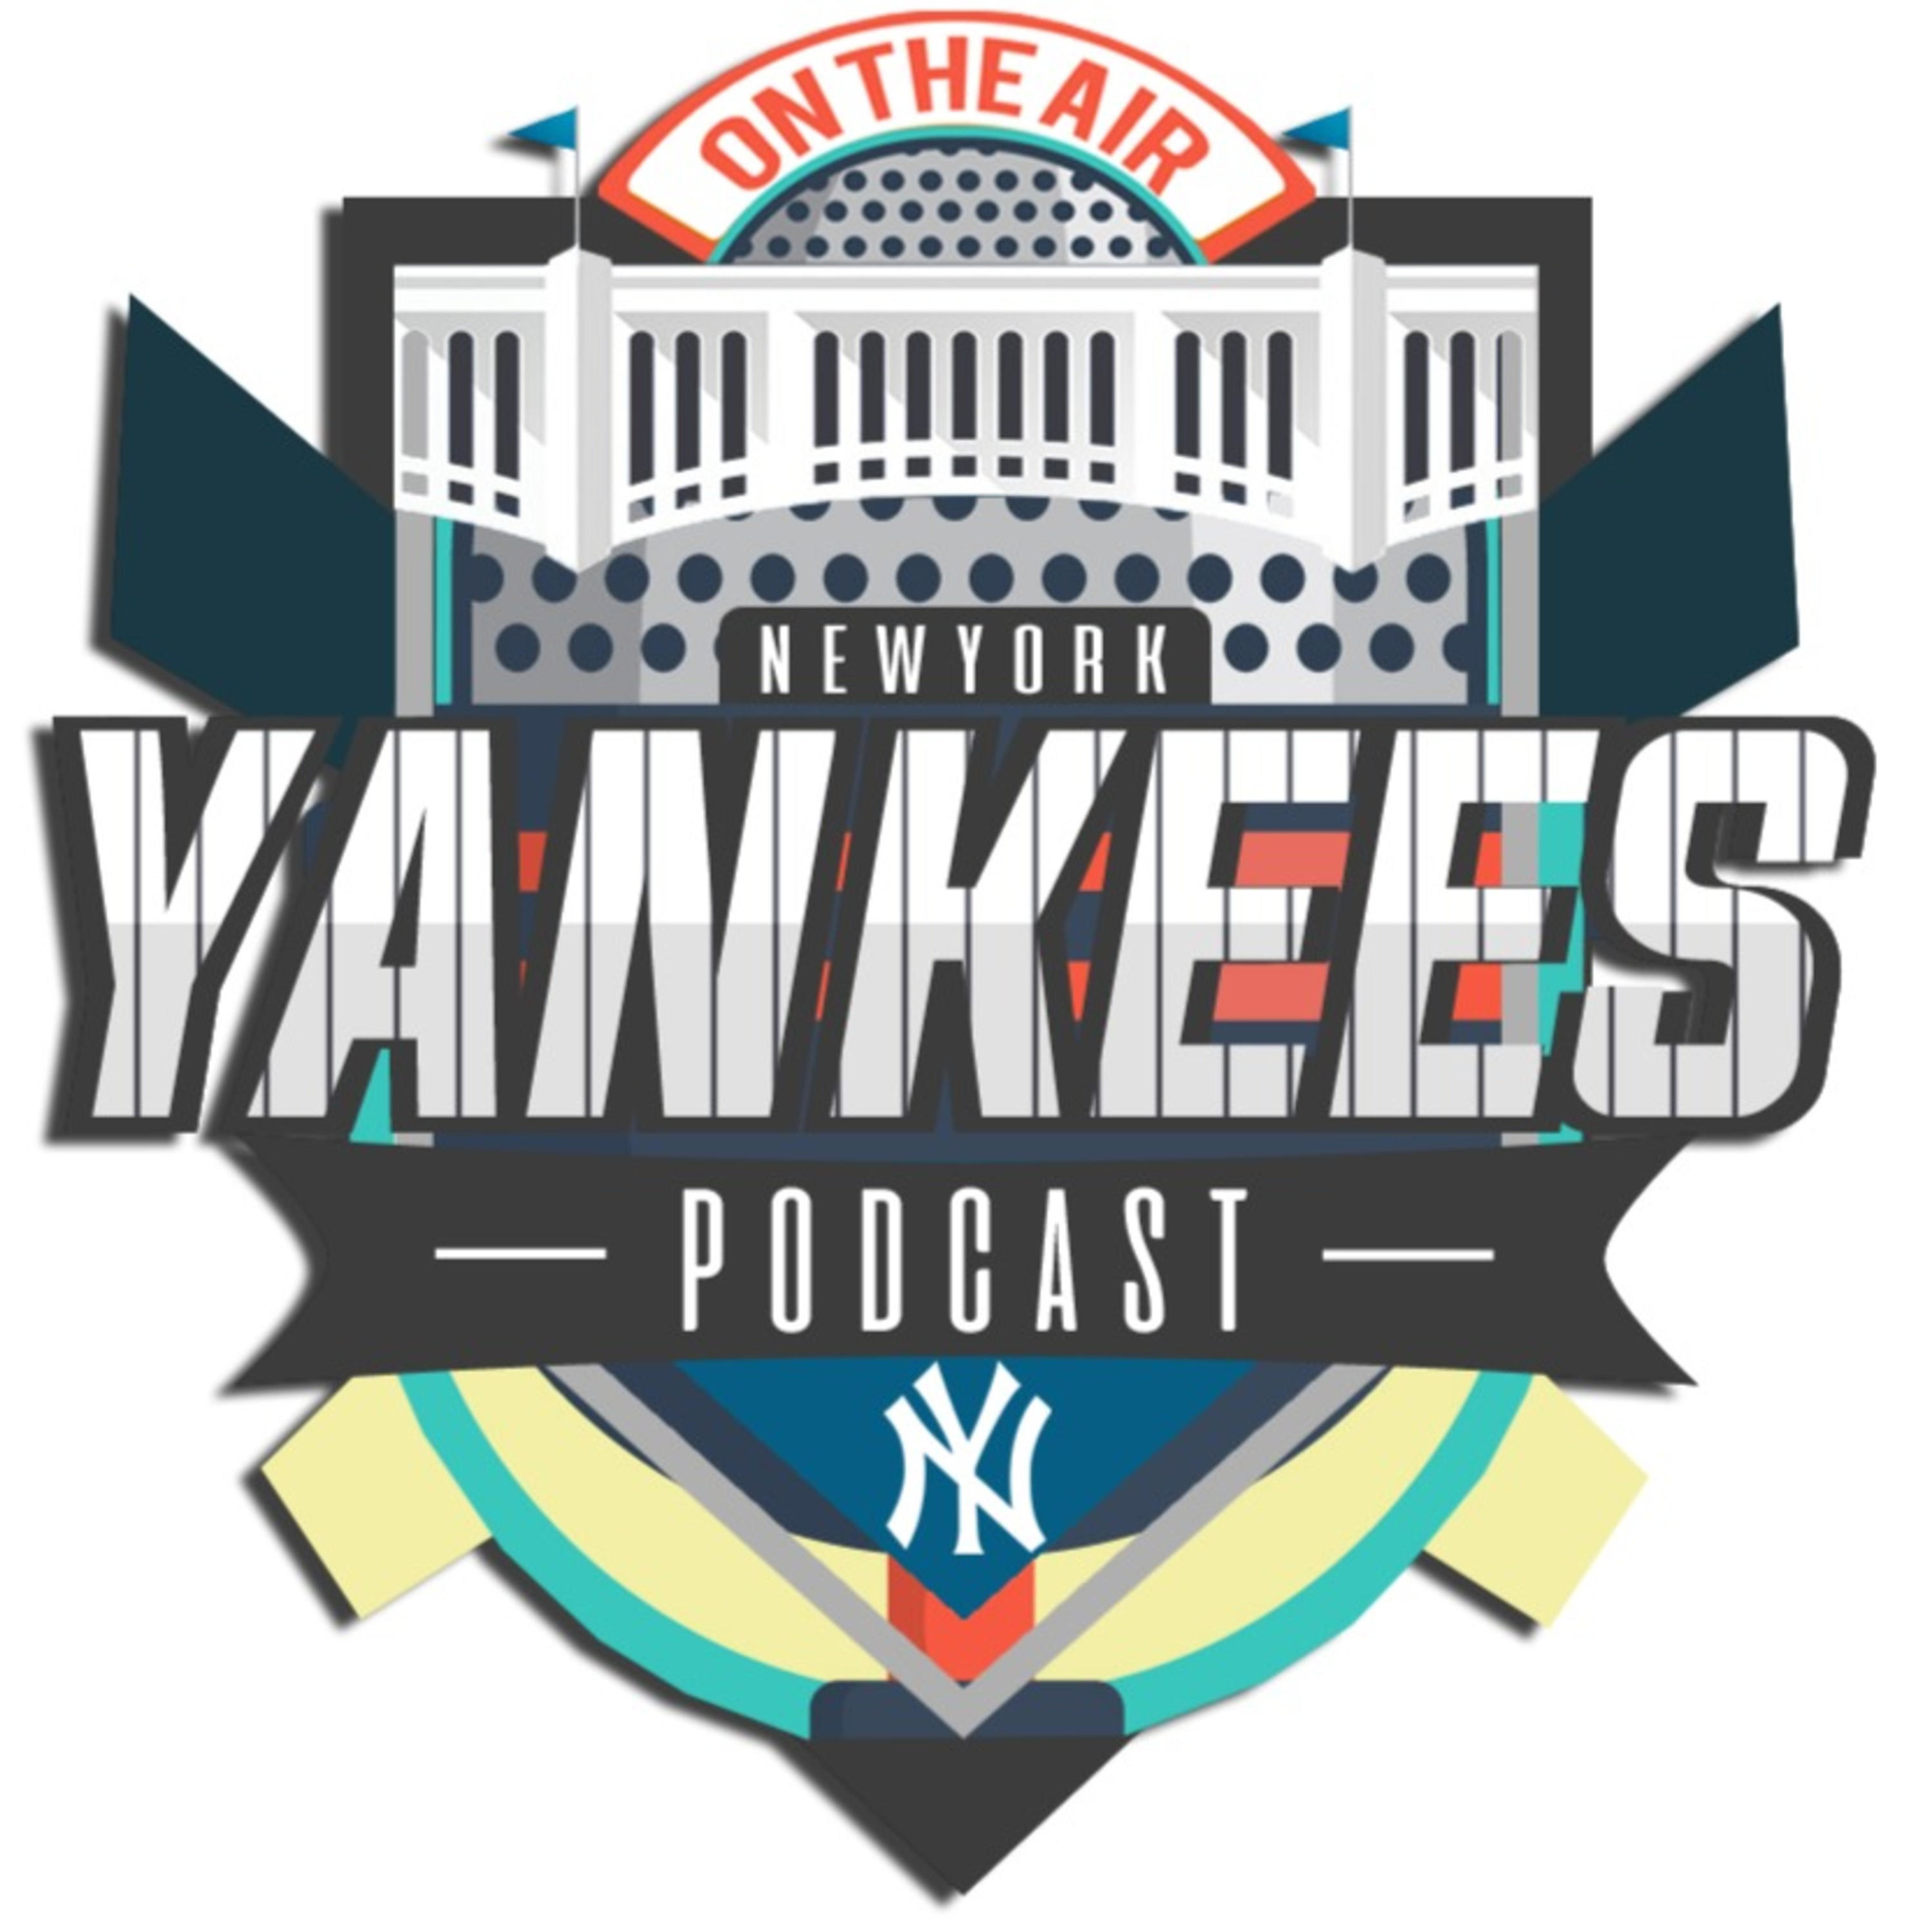 New York Yankees Hungary Podcast - Bé x DS! x Mike - S07EP06